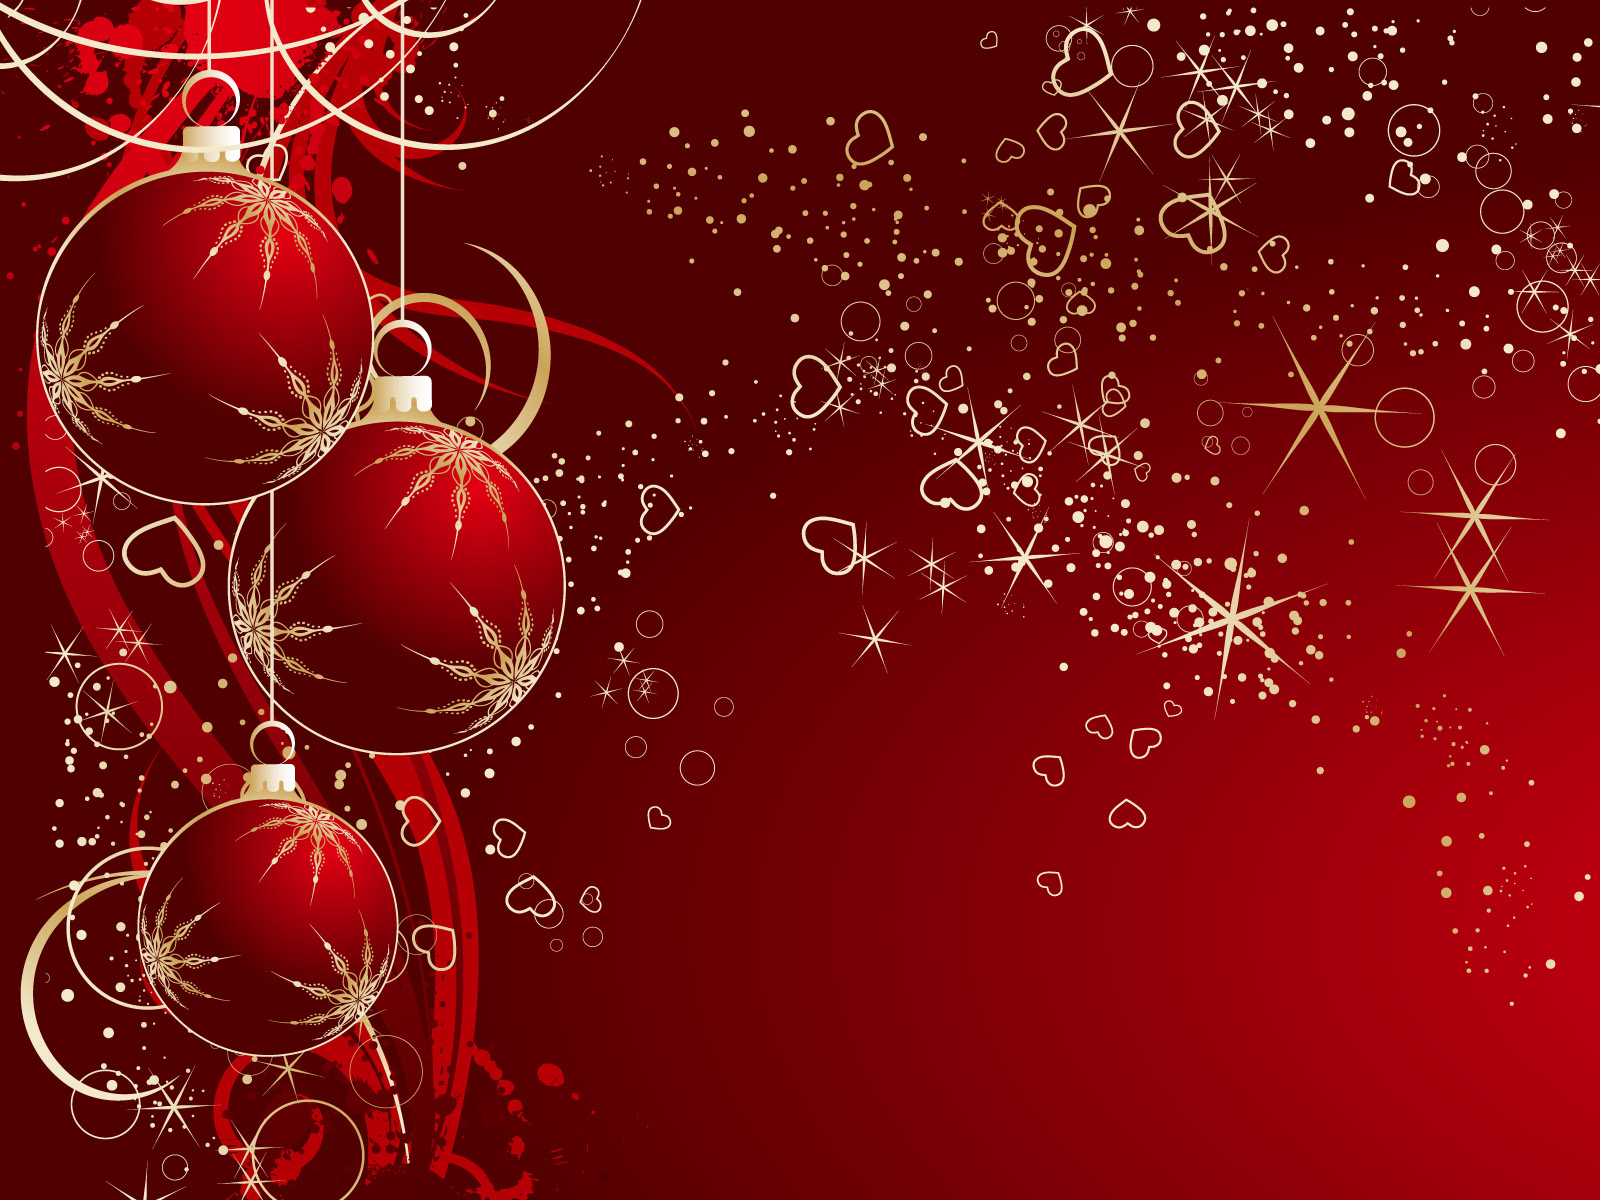 Christmas Computer Wallpaper Backgrounds Group (76+)